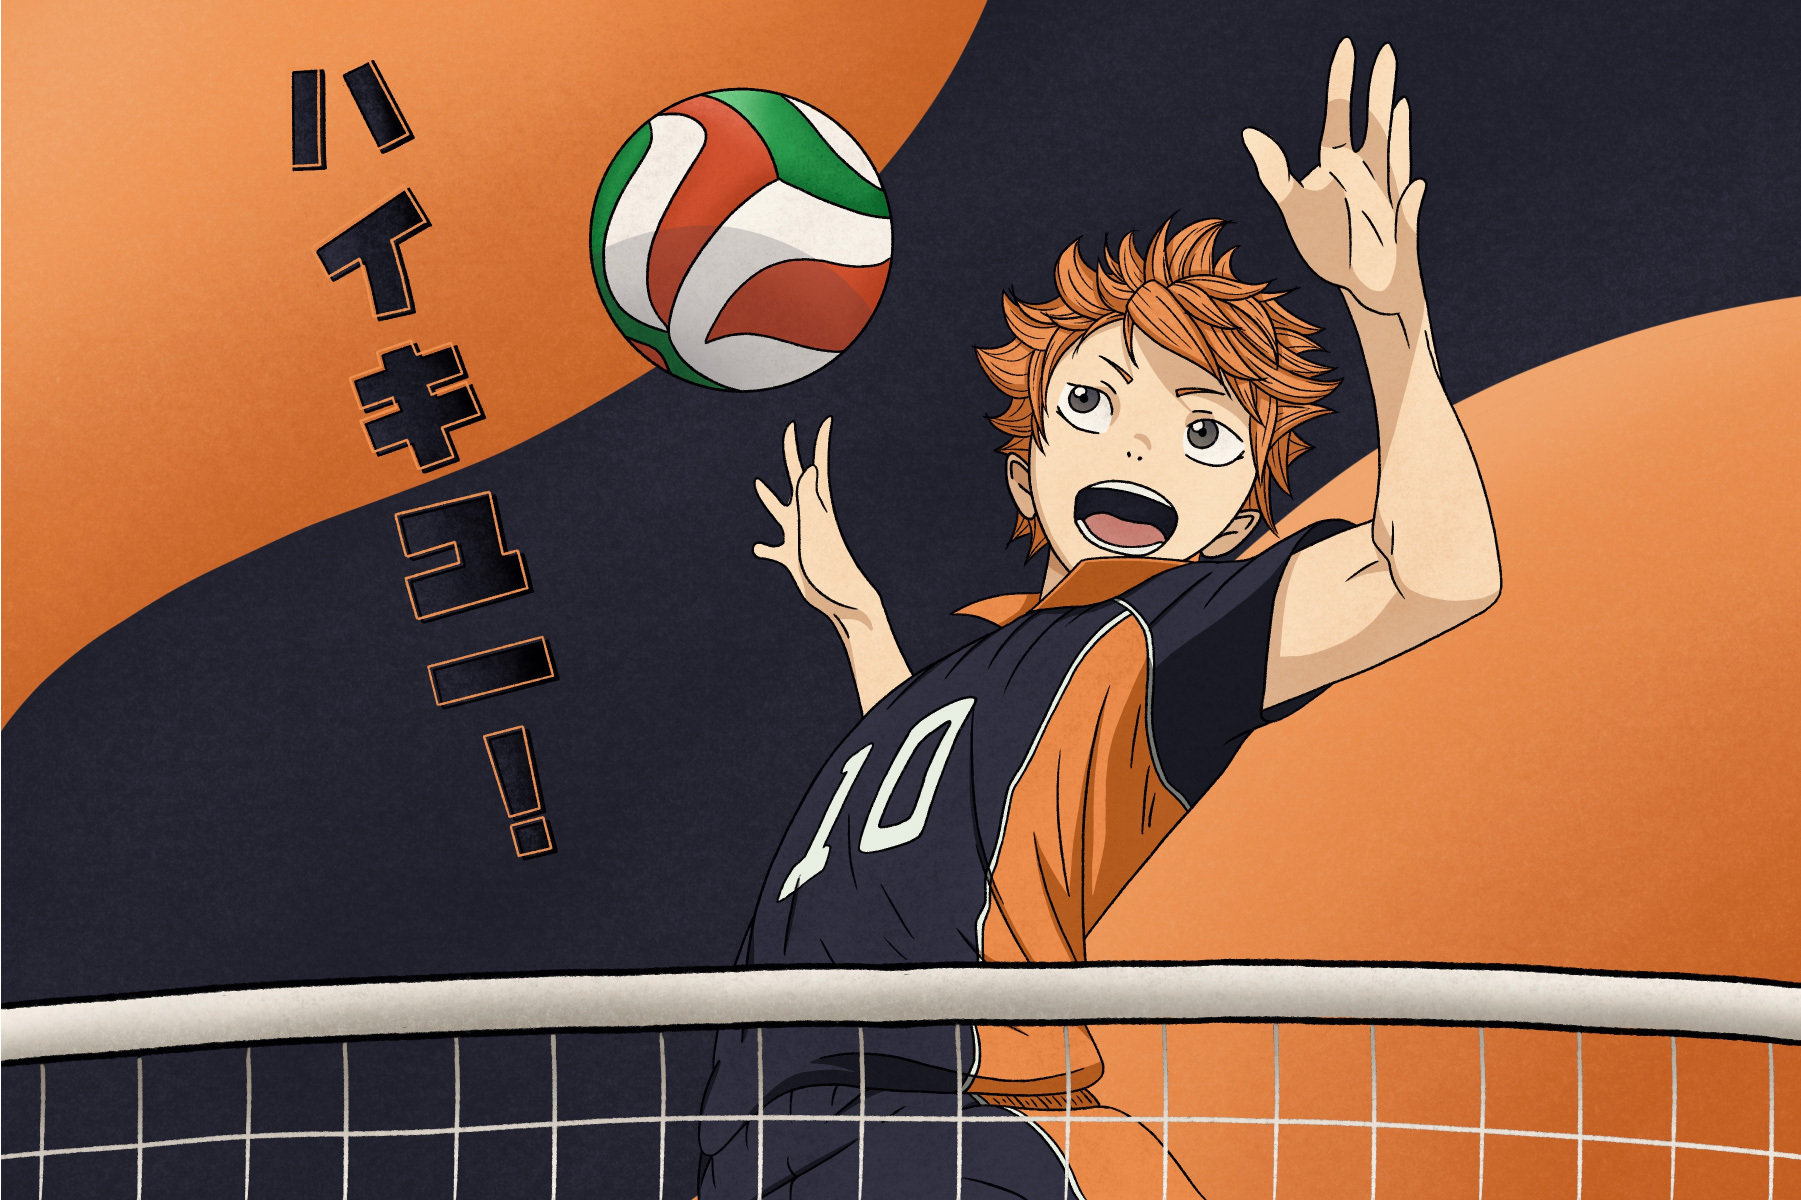 You Don't Need To Love Sports To Be Captivated by 'Haikyu!!'